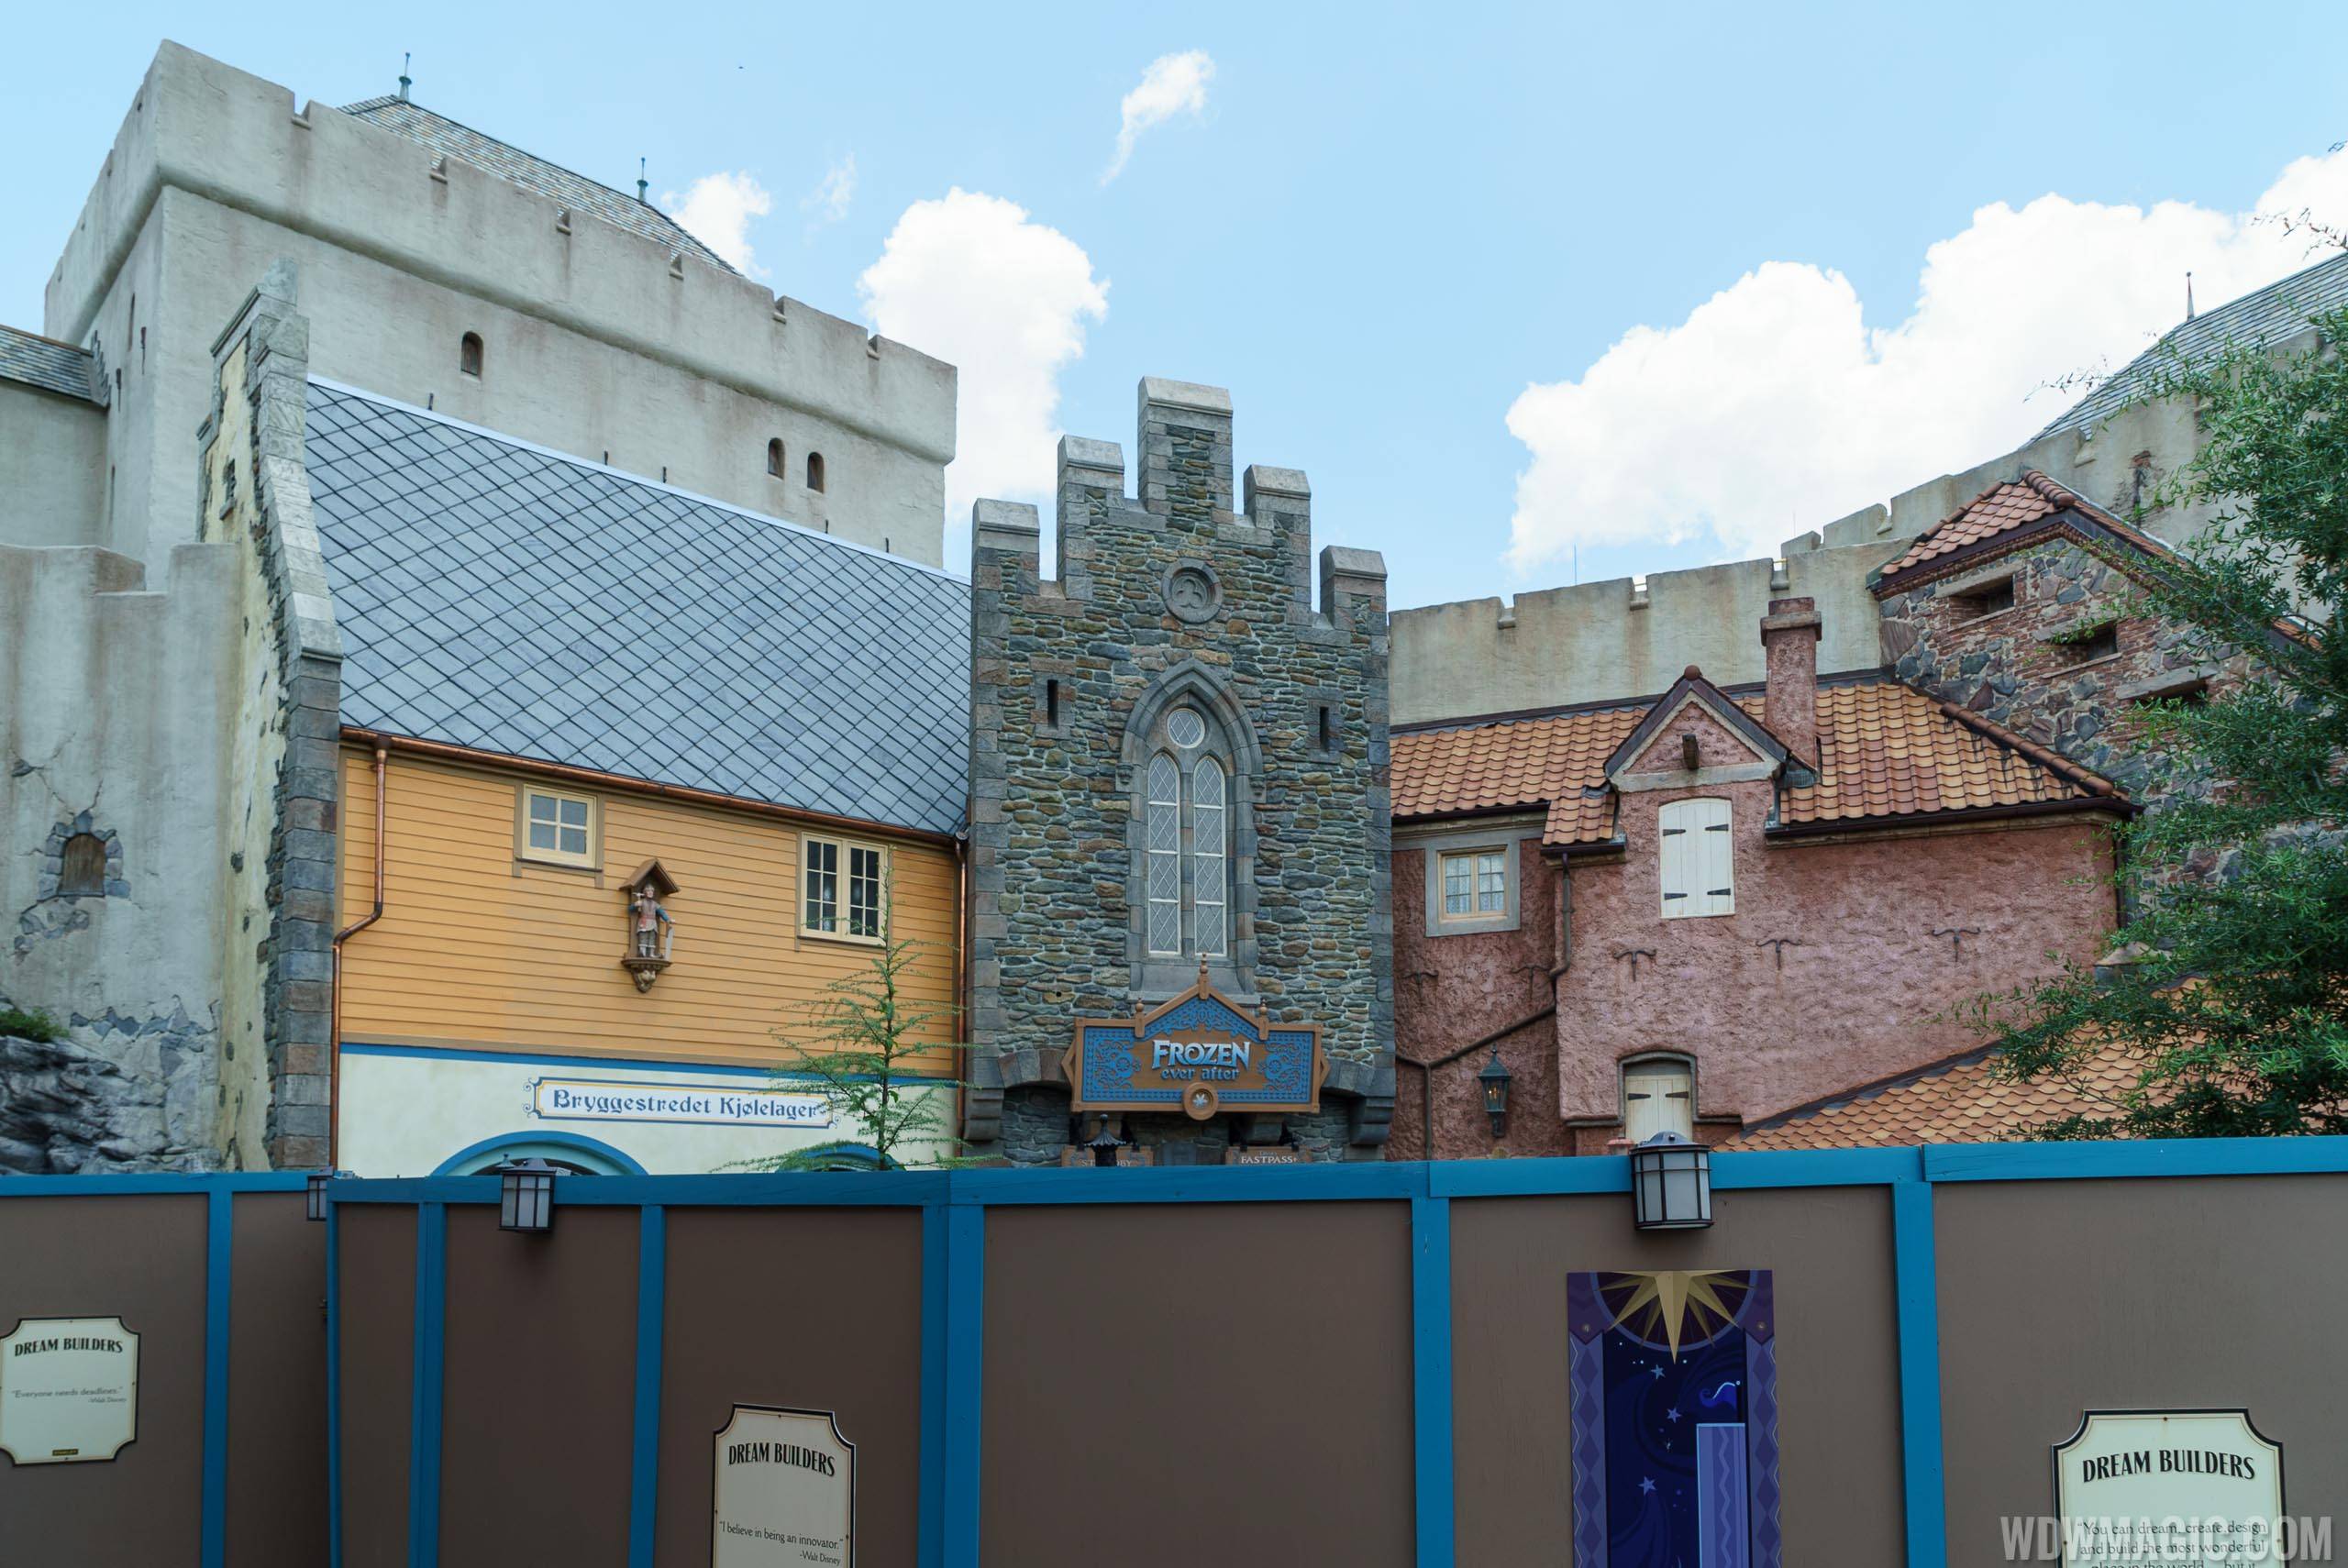 Frozen Ever After construction